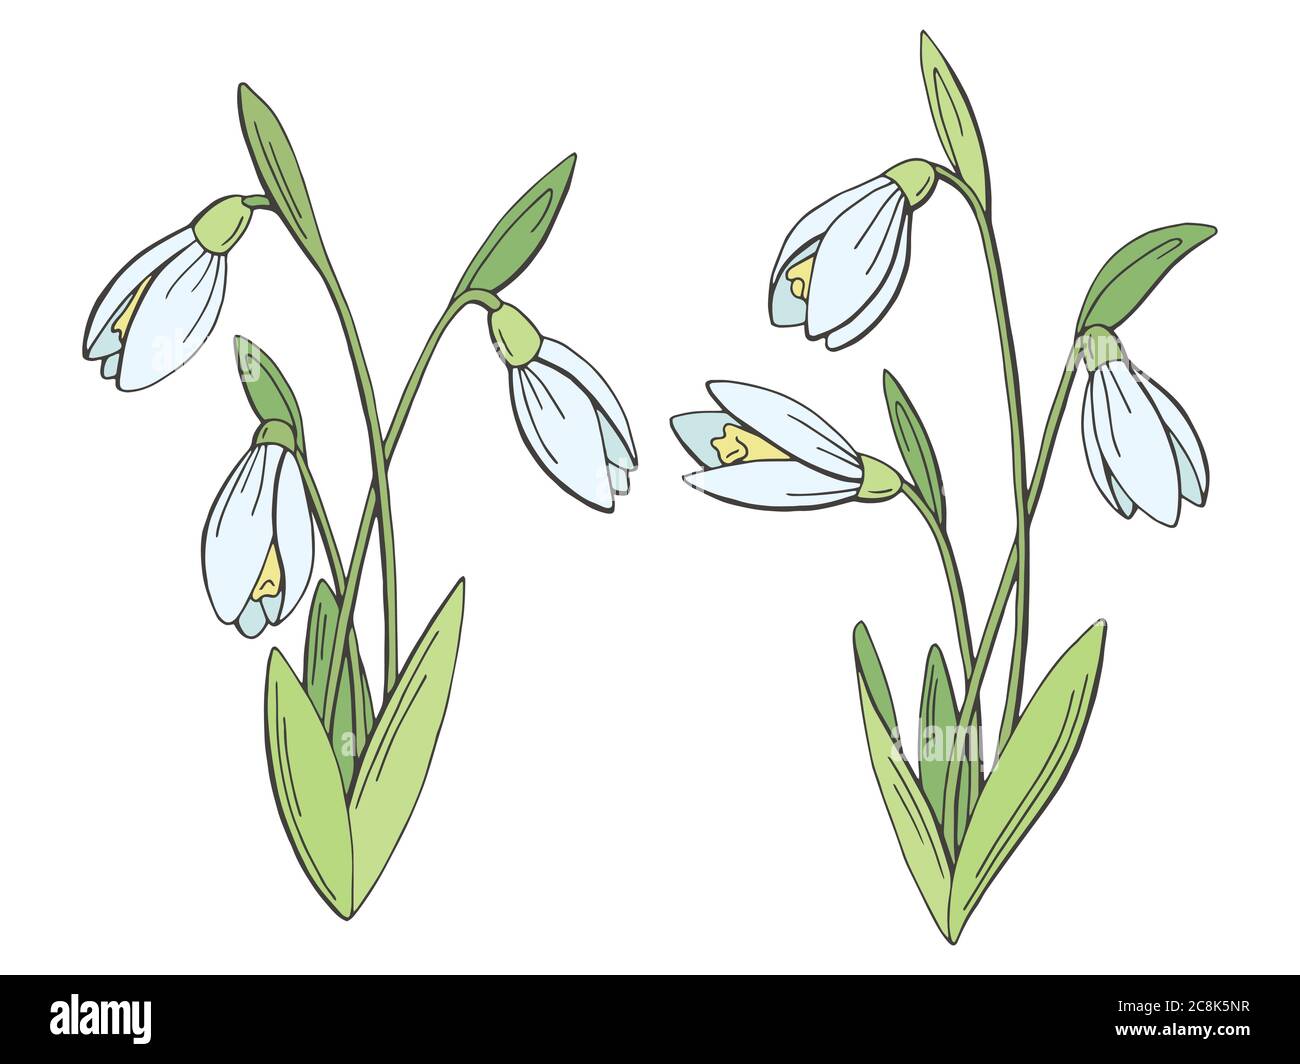 How to Draw Beautiful Snowdrop flower Easy  Draw and Color Snowdrop flower  easy  Flower Drawing  YouTube